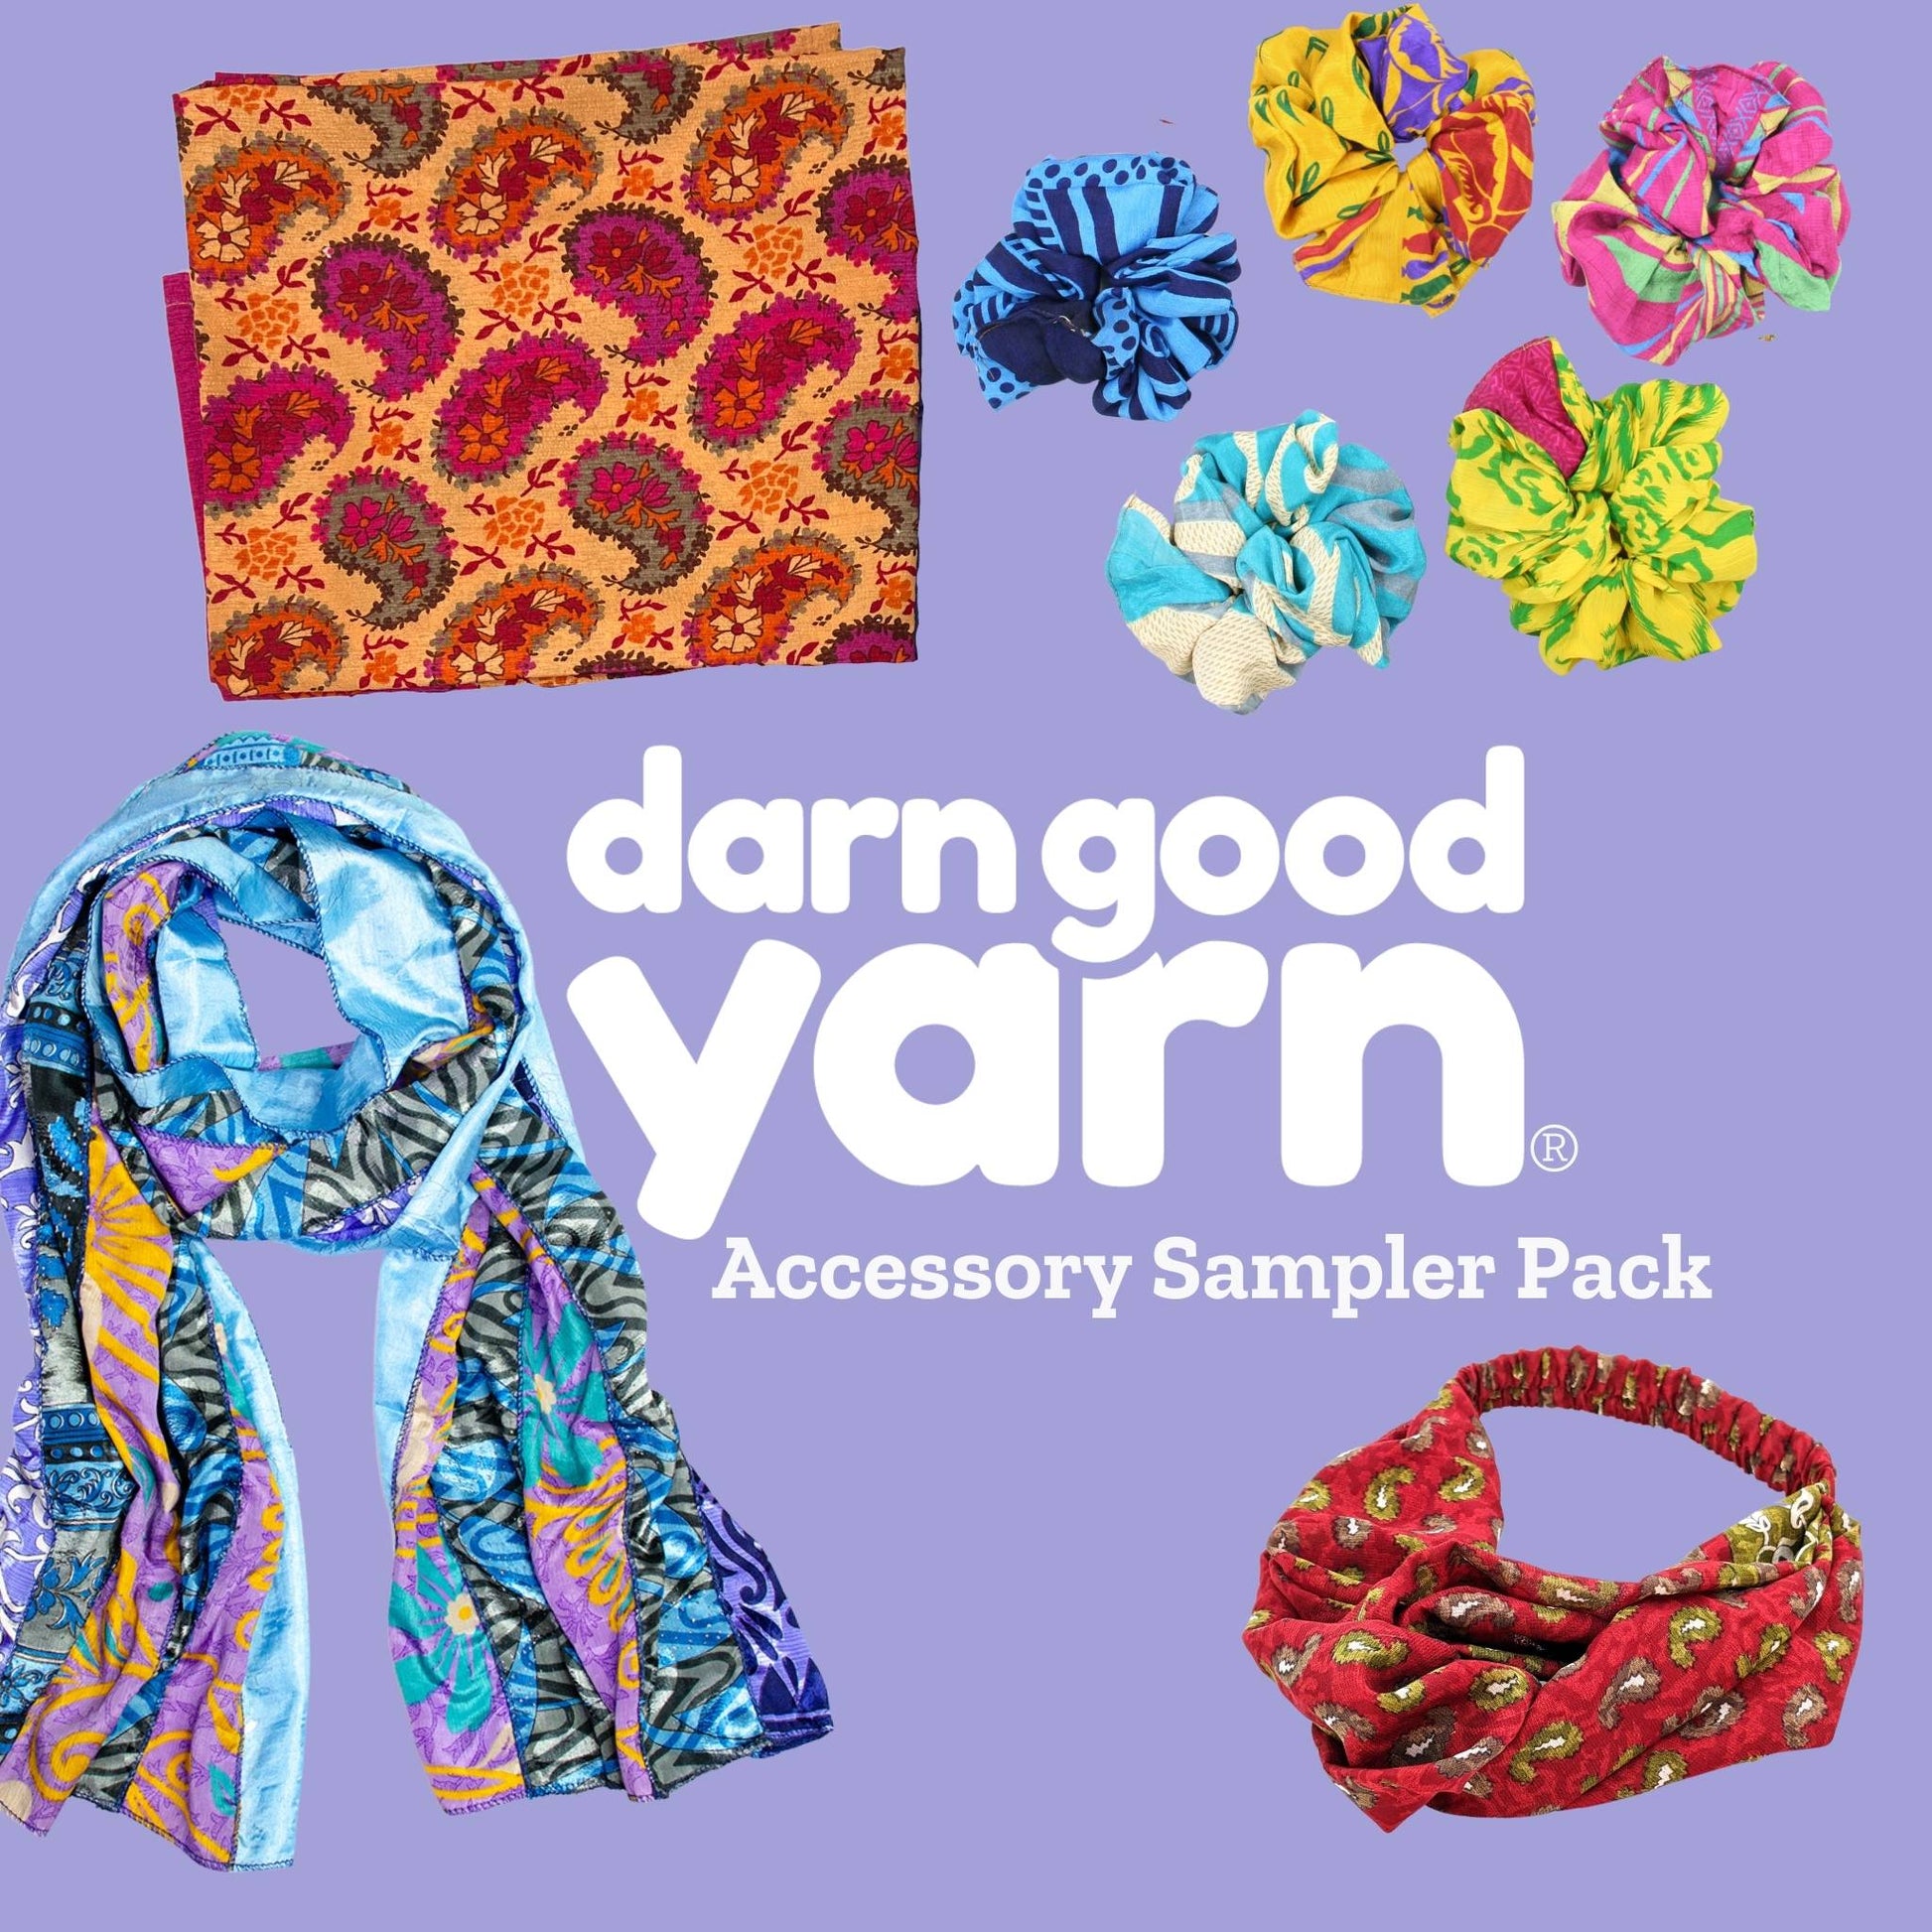 Picture reads Darn Good Yan Accessory Sampler Pack.  A Medley scarf, a kameela knot headband, a scrunchie 5 pack and a furoshiki are on a purple background. 